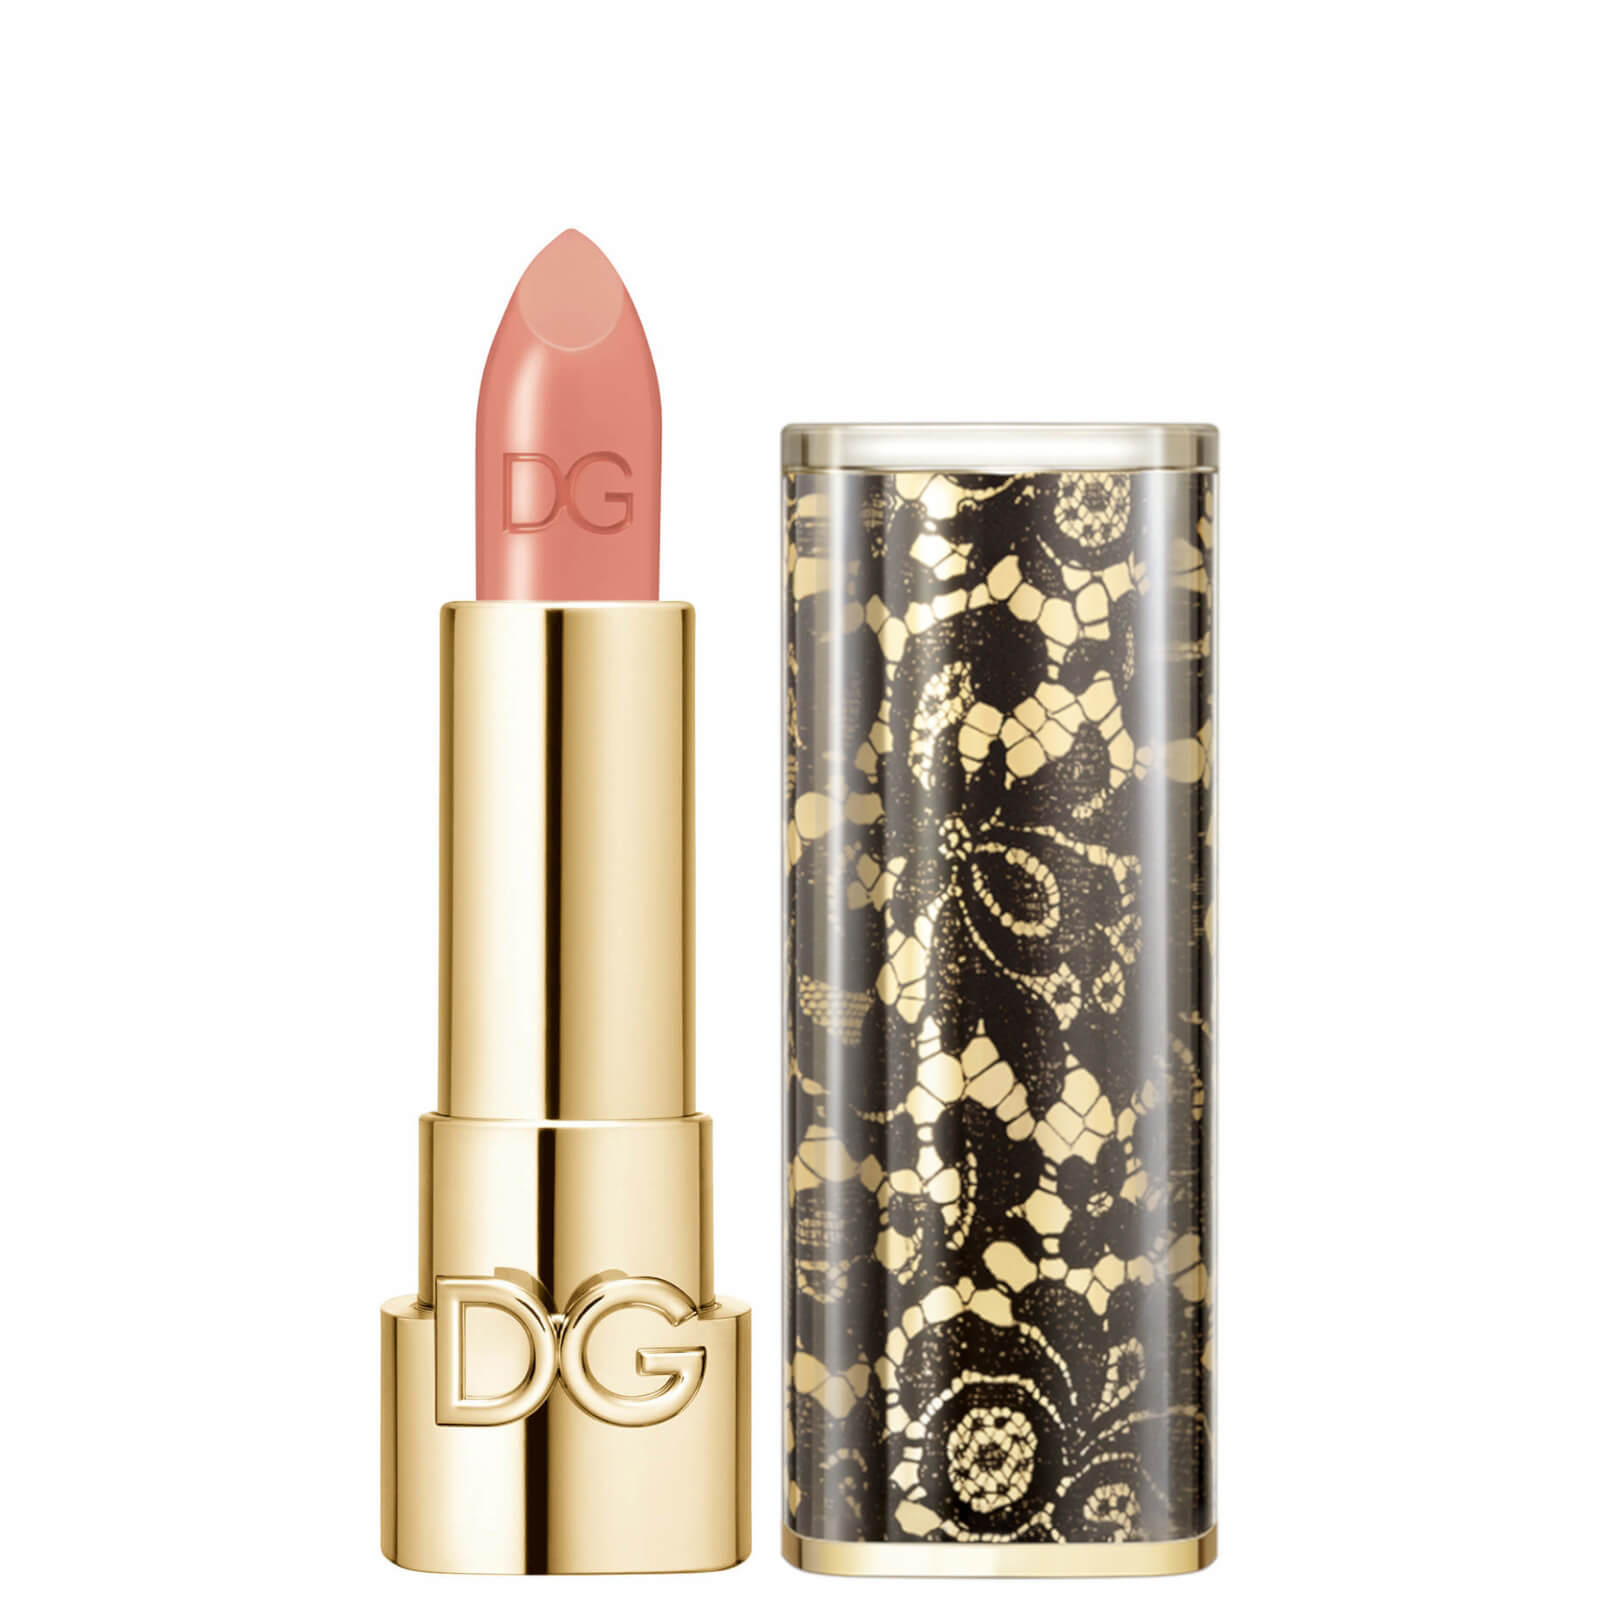 Dolce&Gabbana The Only One Lipstick + Cap (Lace) (Various Shades) - 110 Soft Almond